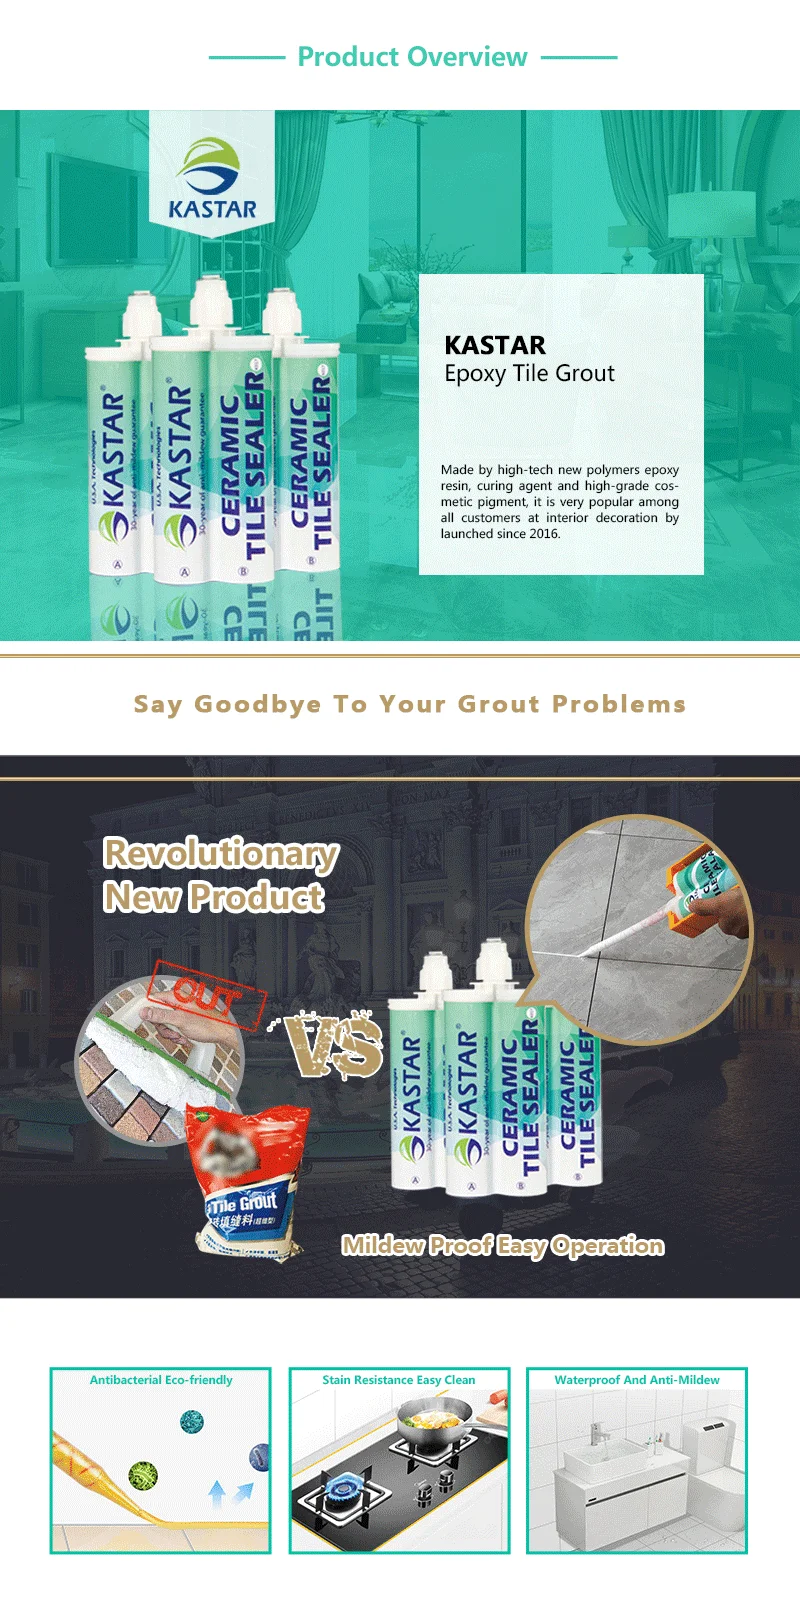 Mix Anti-Aging No Harmful Water Resistance Ready Grout For House Renovation